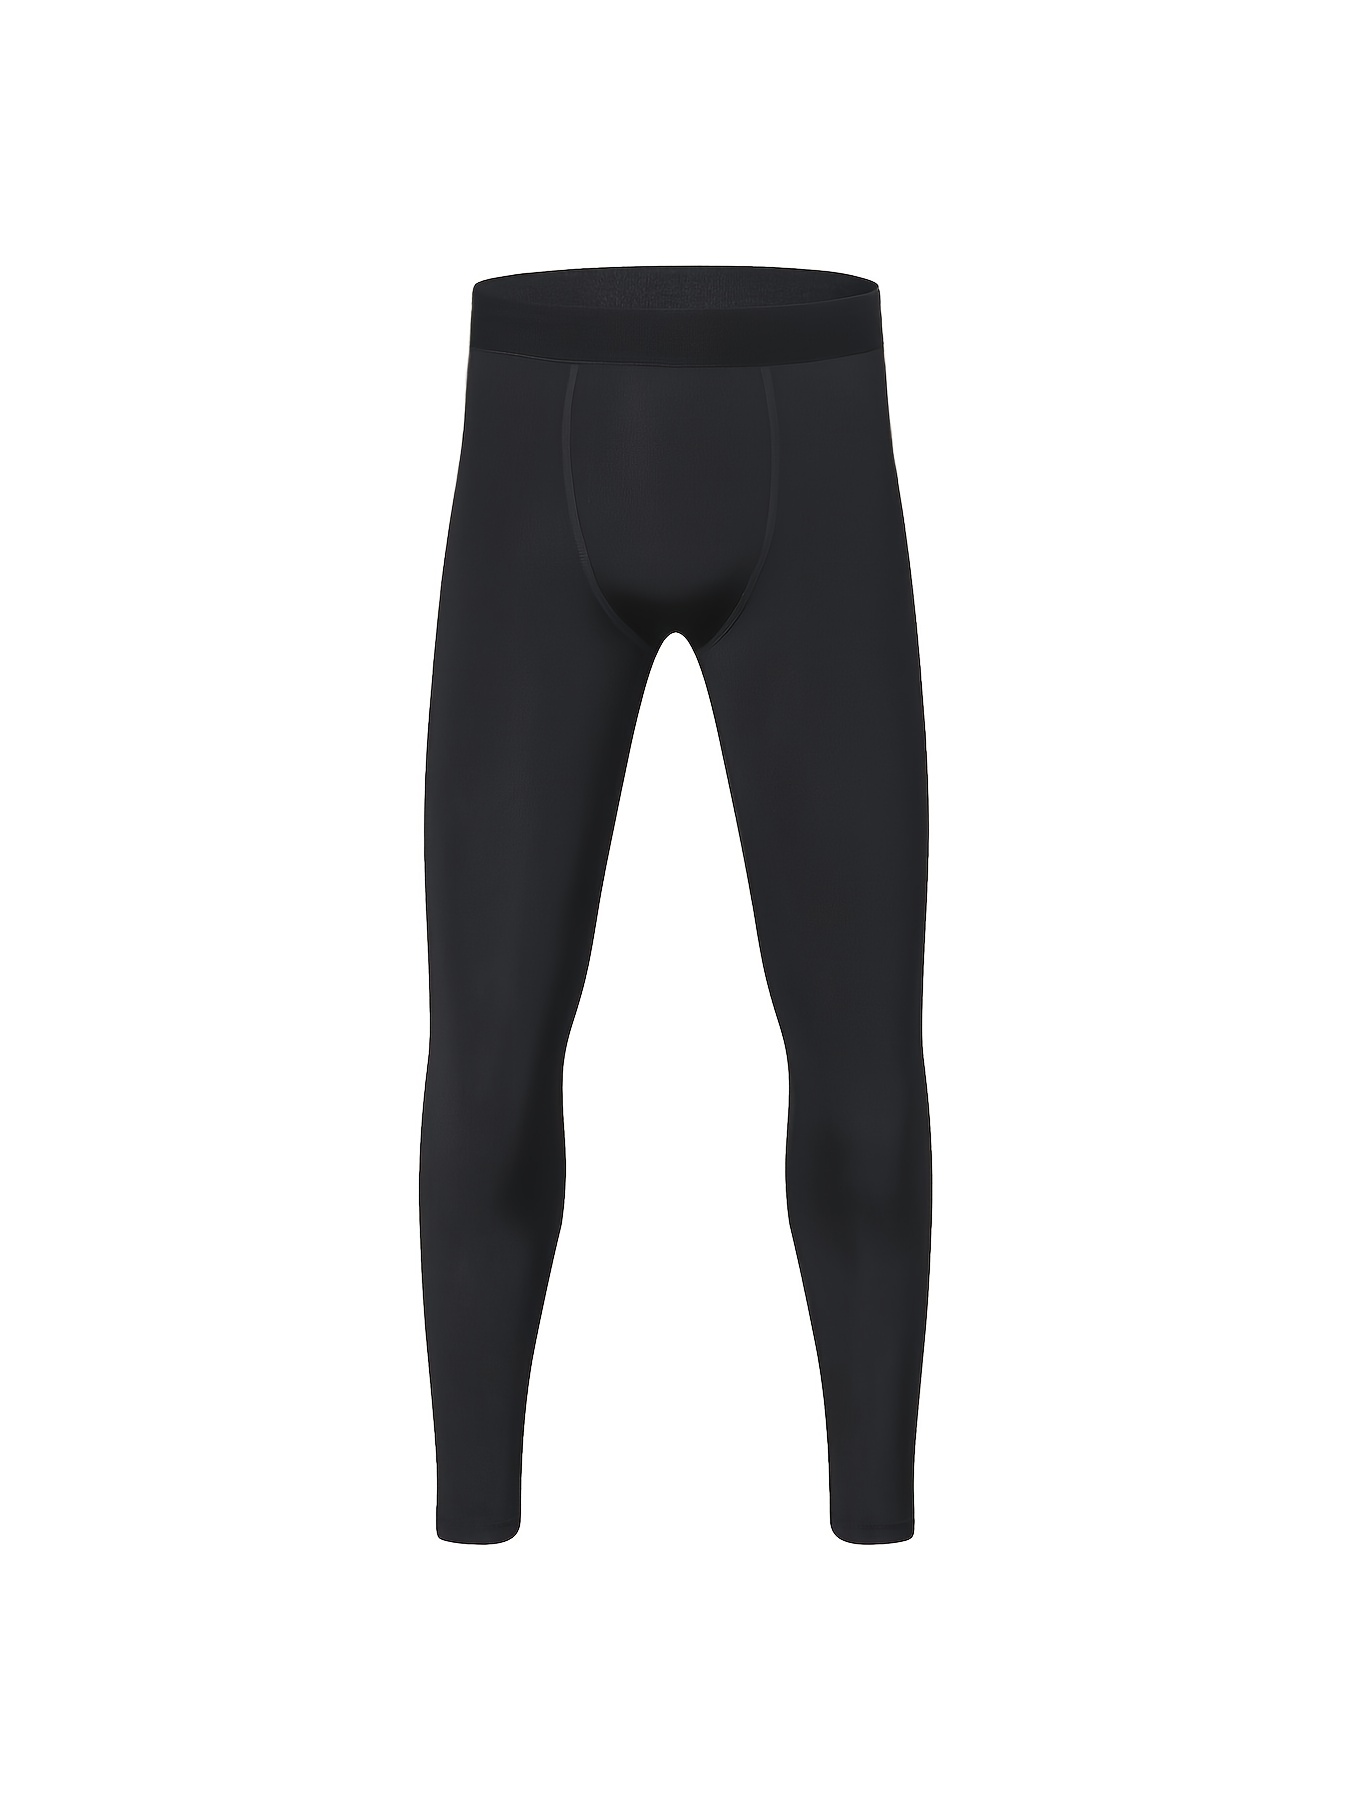 TELALEO Girls/boys Youth Compression Leggings - Athletic Base Layer For  Running, Hockey, Basketball - Moisture-Wicking, Quick-Drying, Breathable